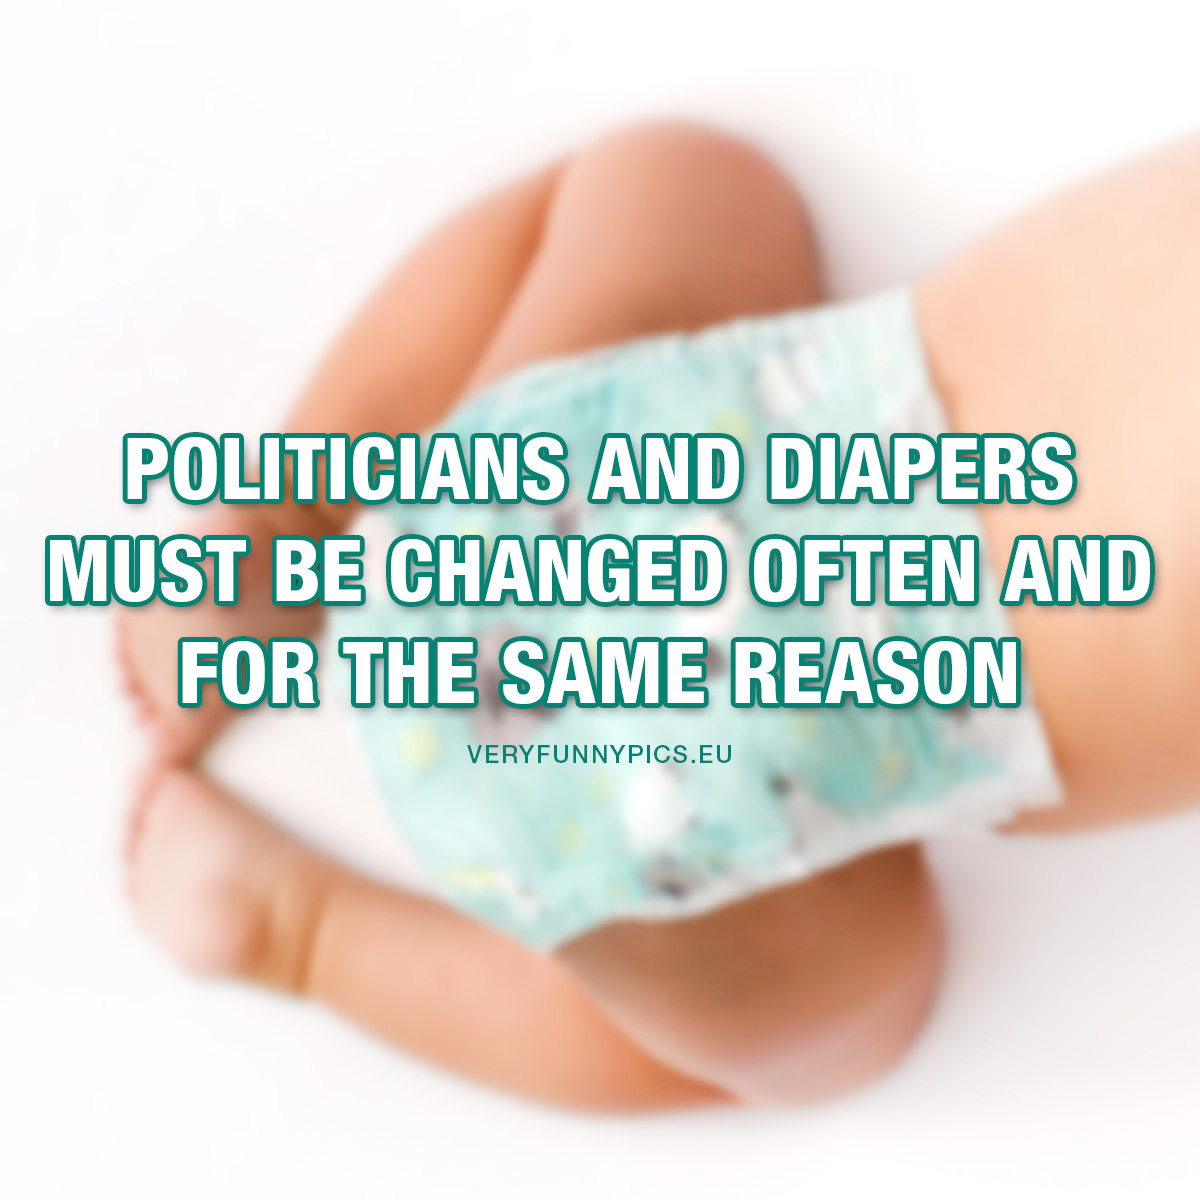 Funny quote about politicians and diapers